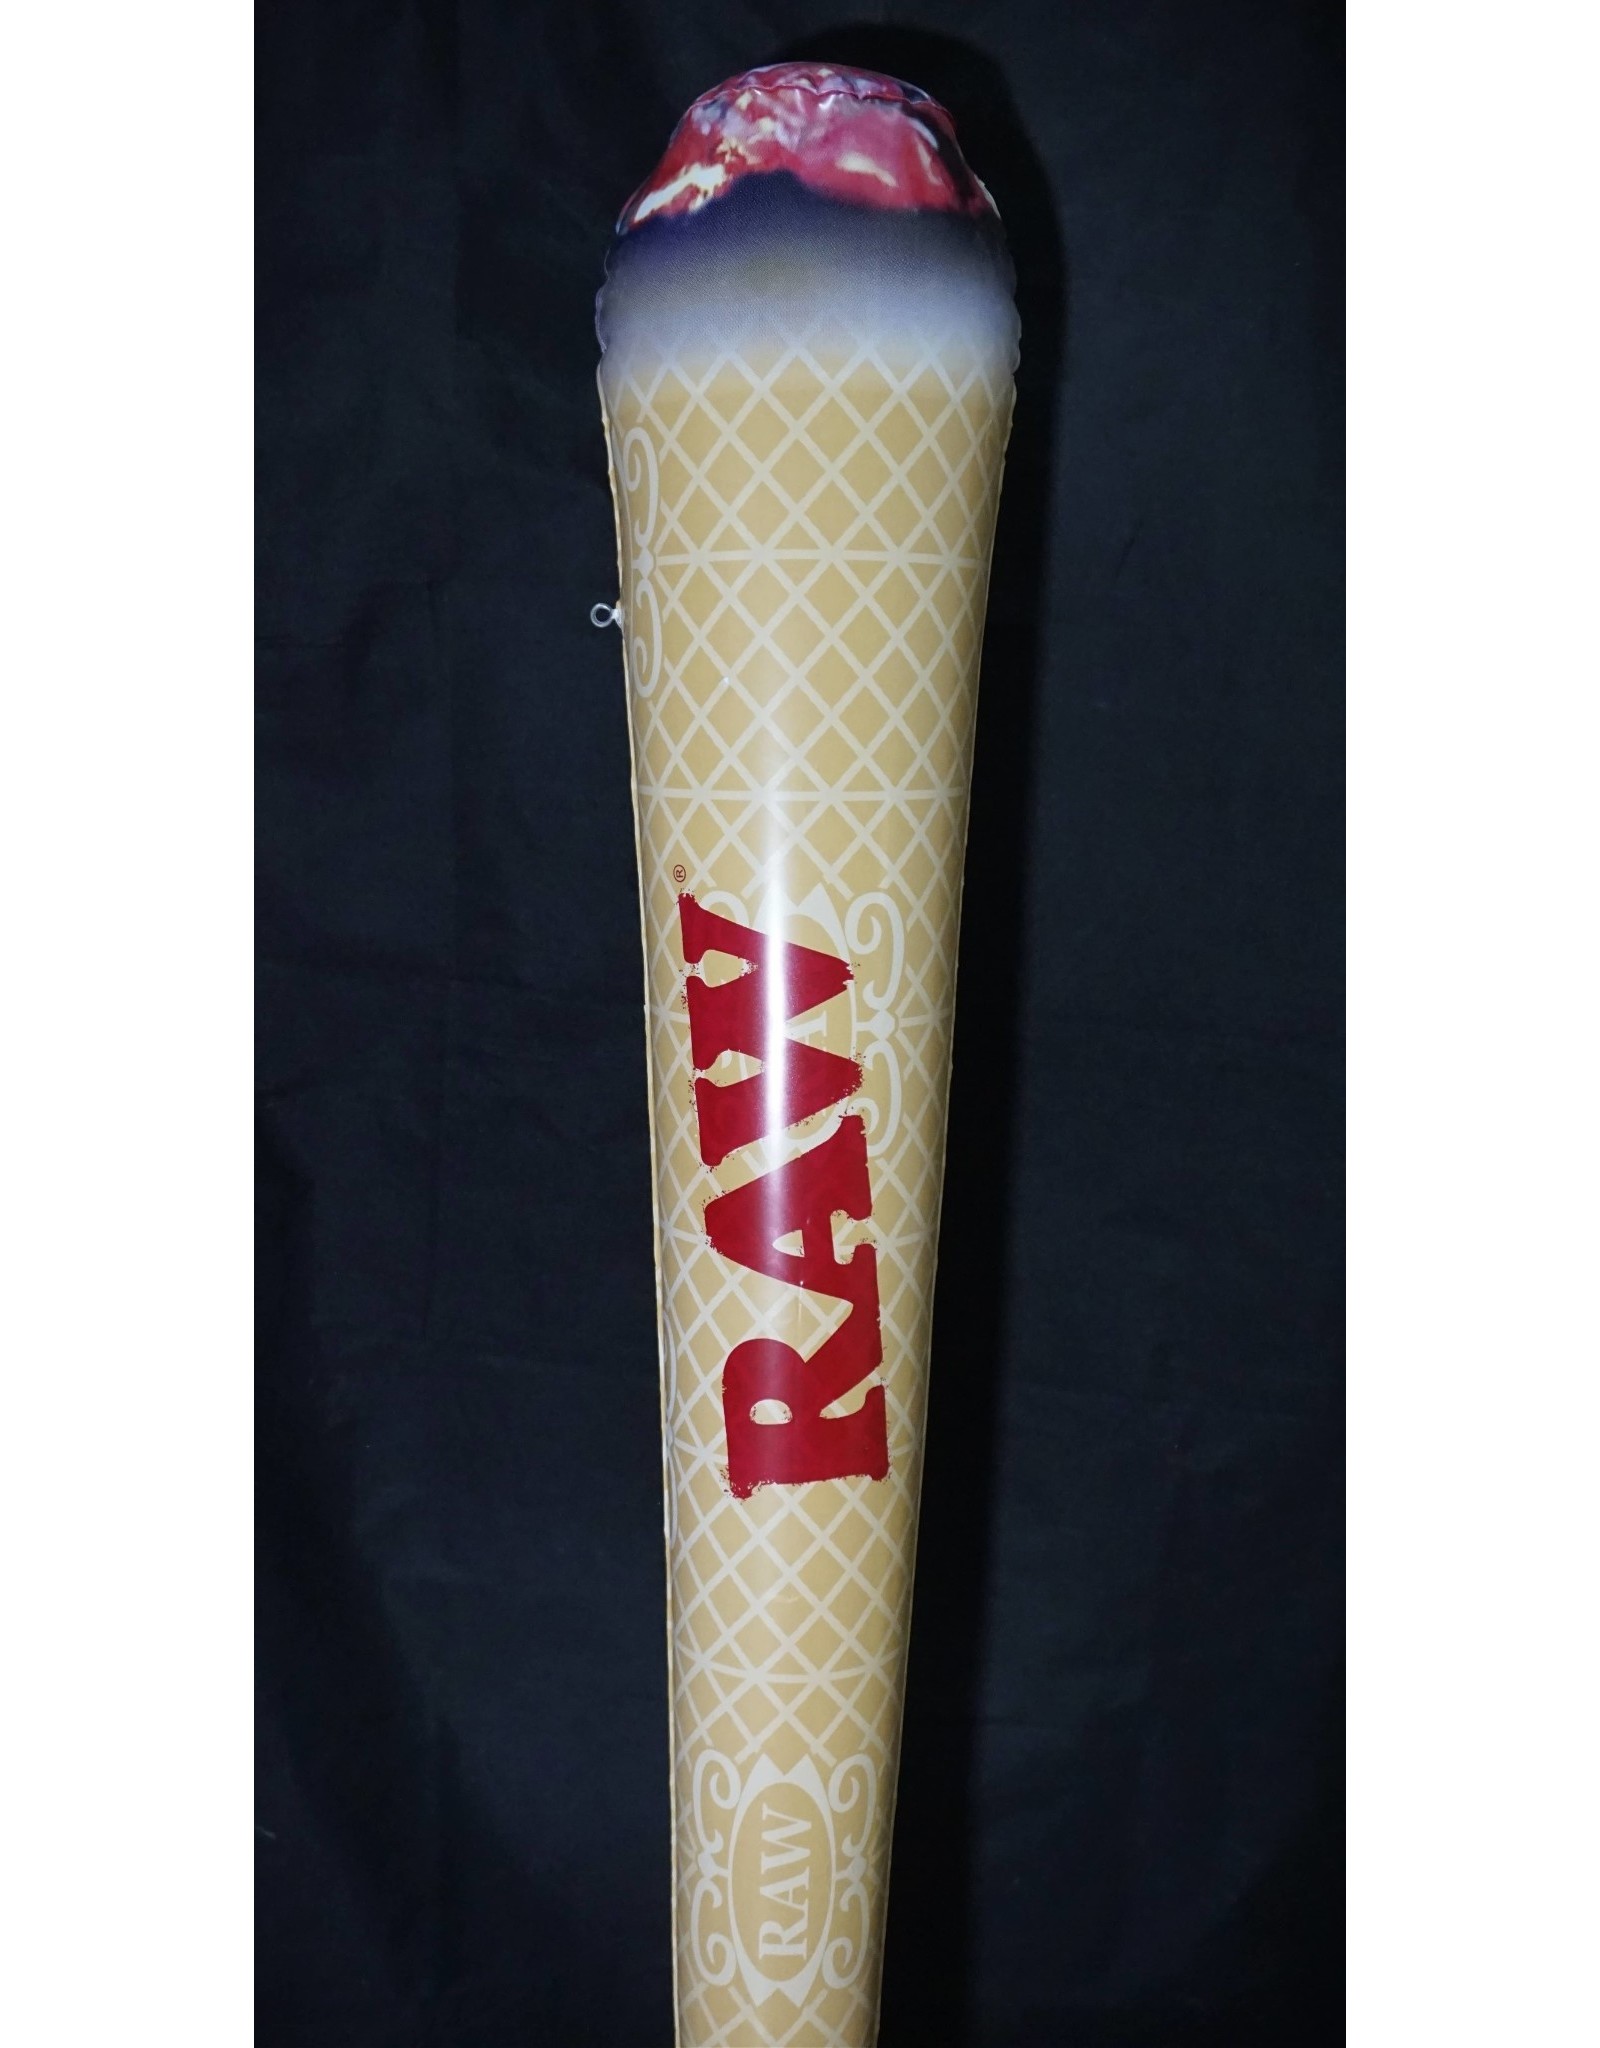 Raw Raw Inflatable 6ft Cone